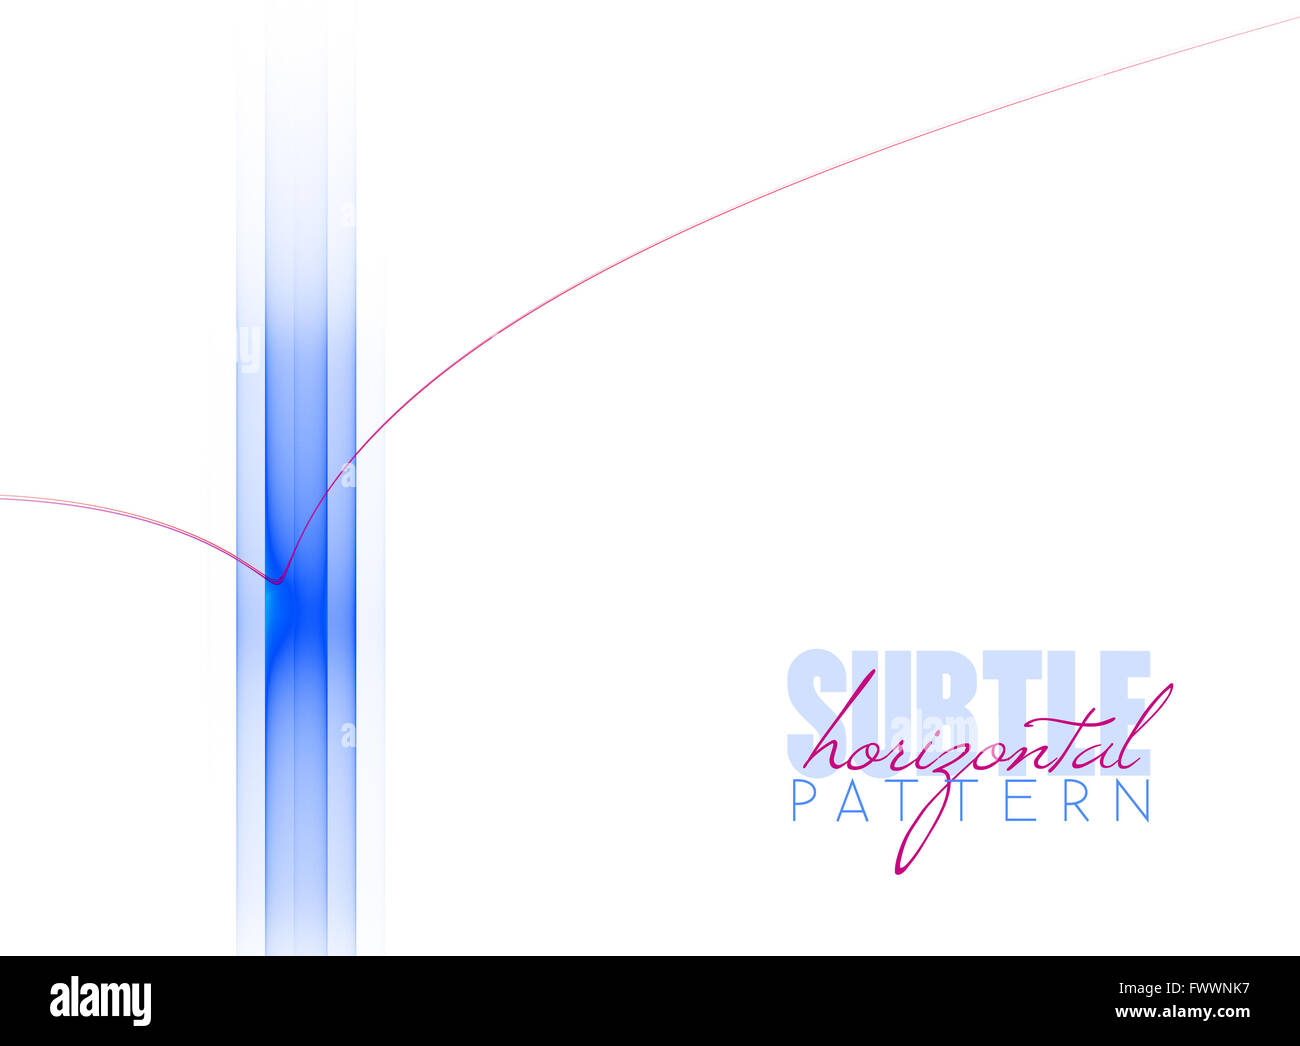 Abstract horizontal pattern with blue stripe and thin red curved line. Clean design. Graphic template Stock Photo